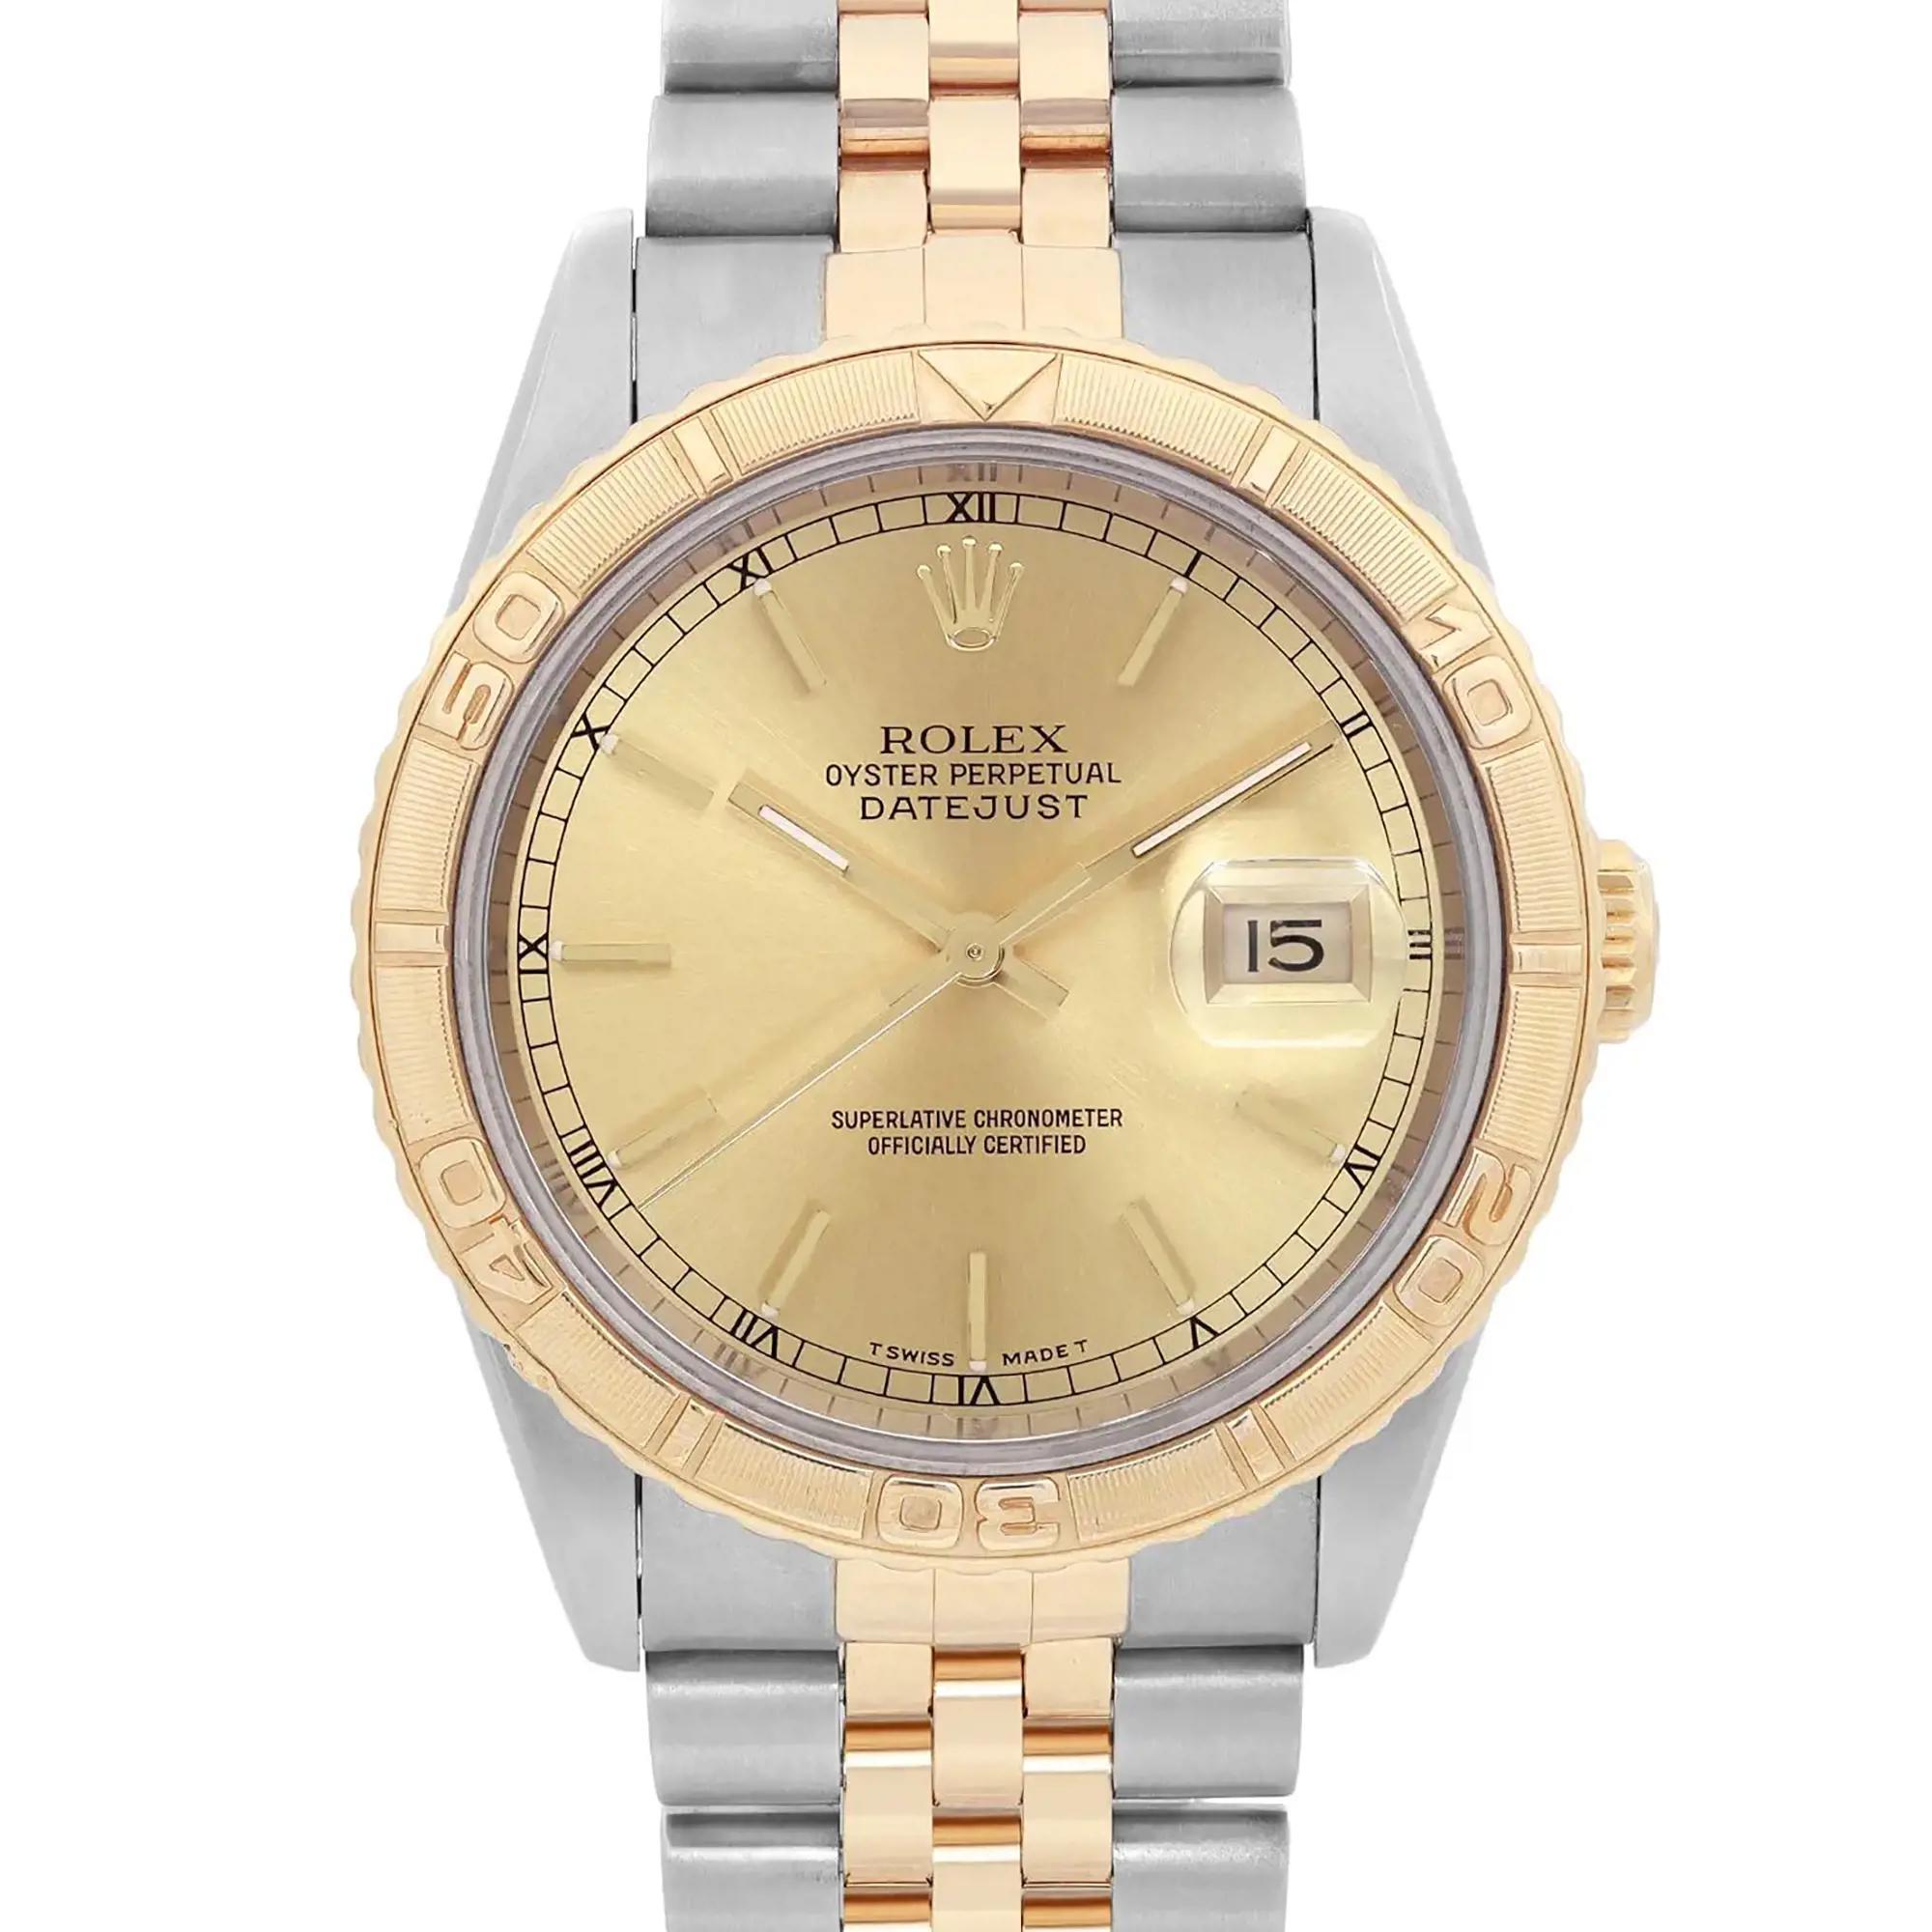 This timepiece was Produced in 1995. The bracelet shows moderate slack. No original box and papers.

Brand: Rolex  Type: Wristwatch  Department: Men  Model Number: 16263  Country/Region of Manufacture: Switzerland  Style: Luxury  Model: Rolex